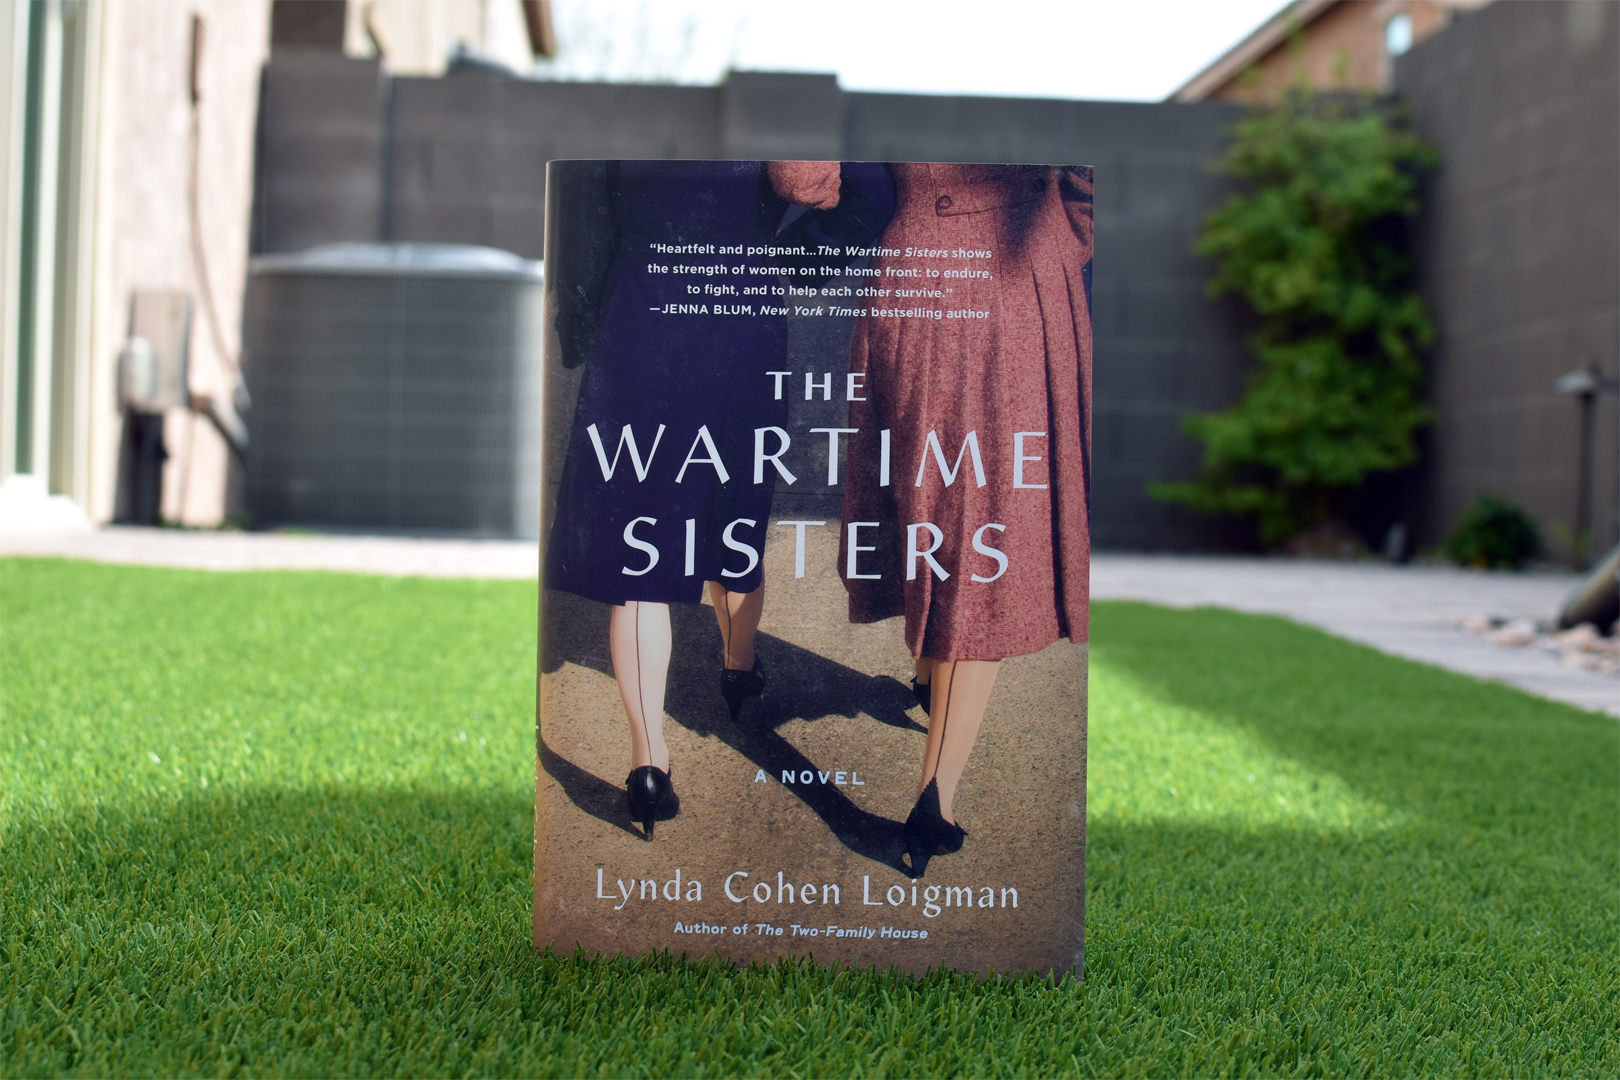 Book Club Questions for The Wartime Sisters by Lynda Cohen Loigman